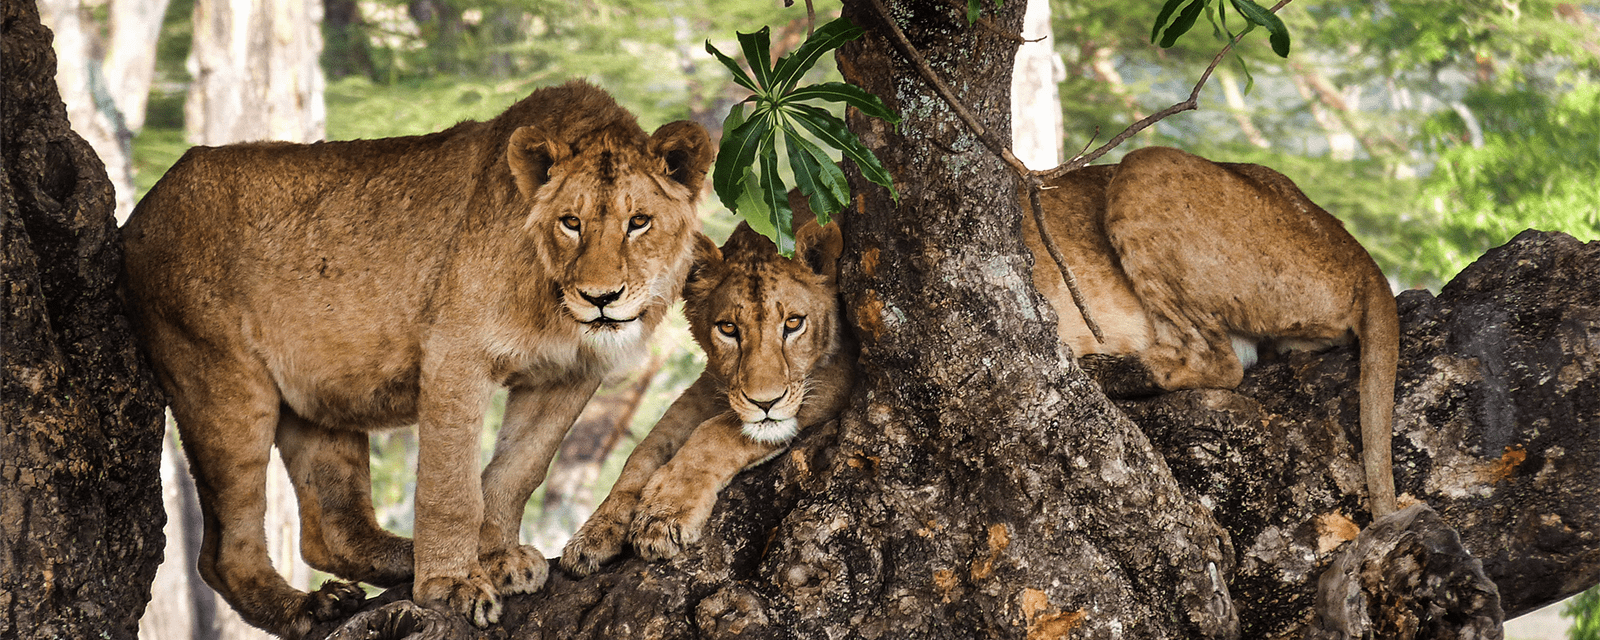 Lions In Tree